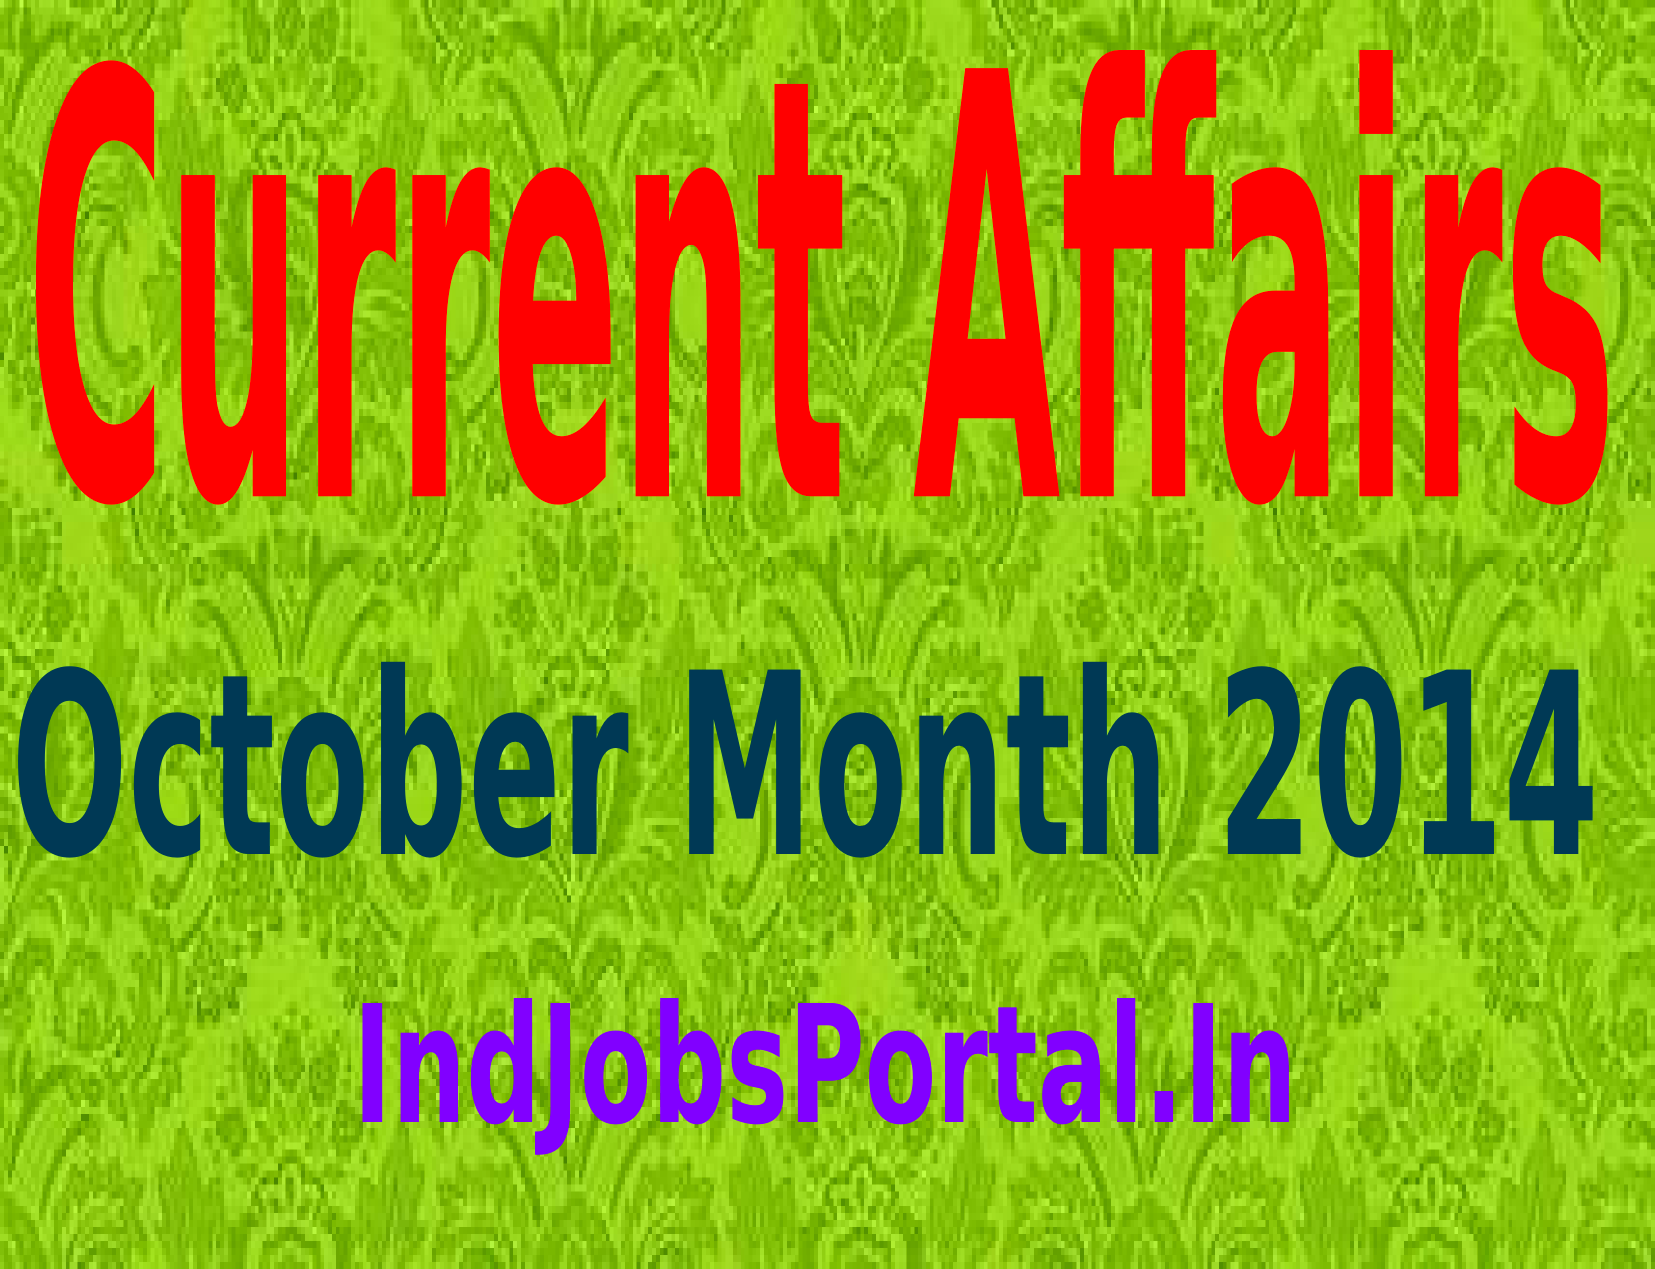 Rundown Of Some Current Affairs Questions, October Month 2014